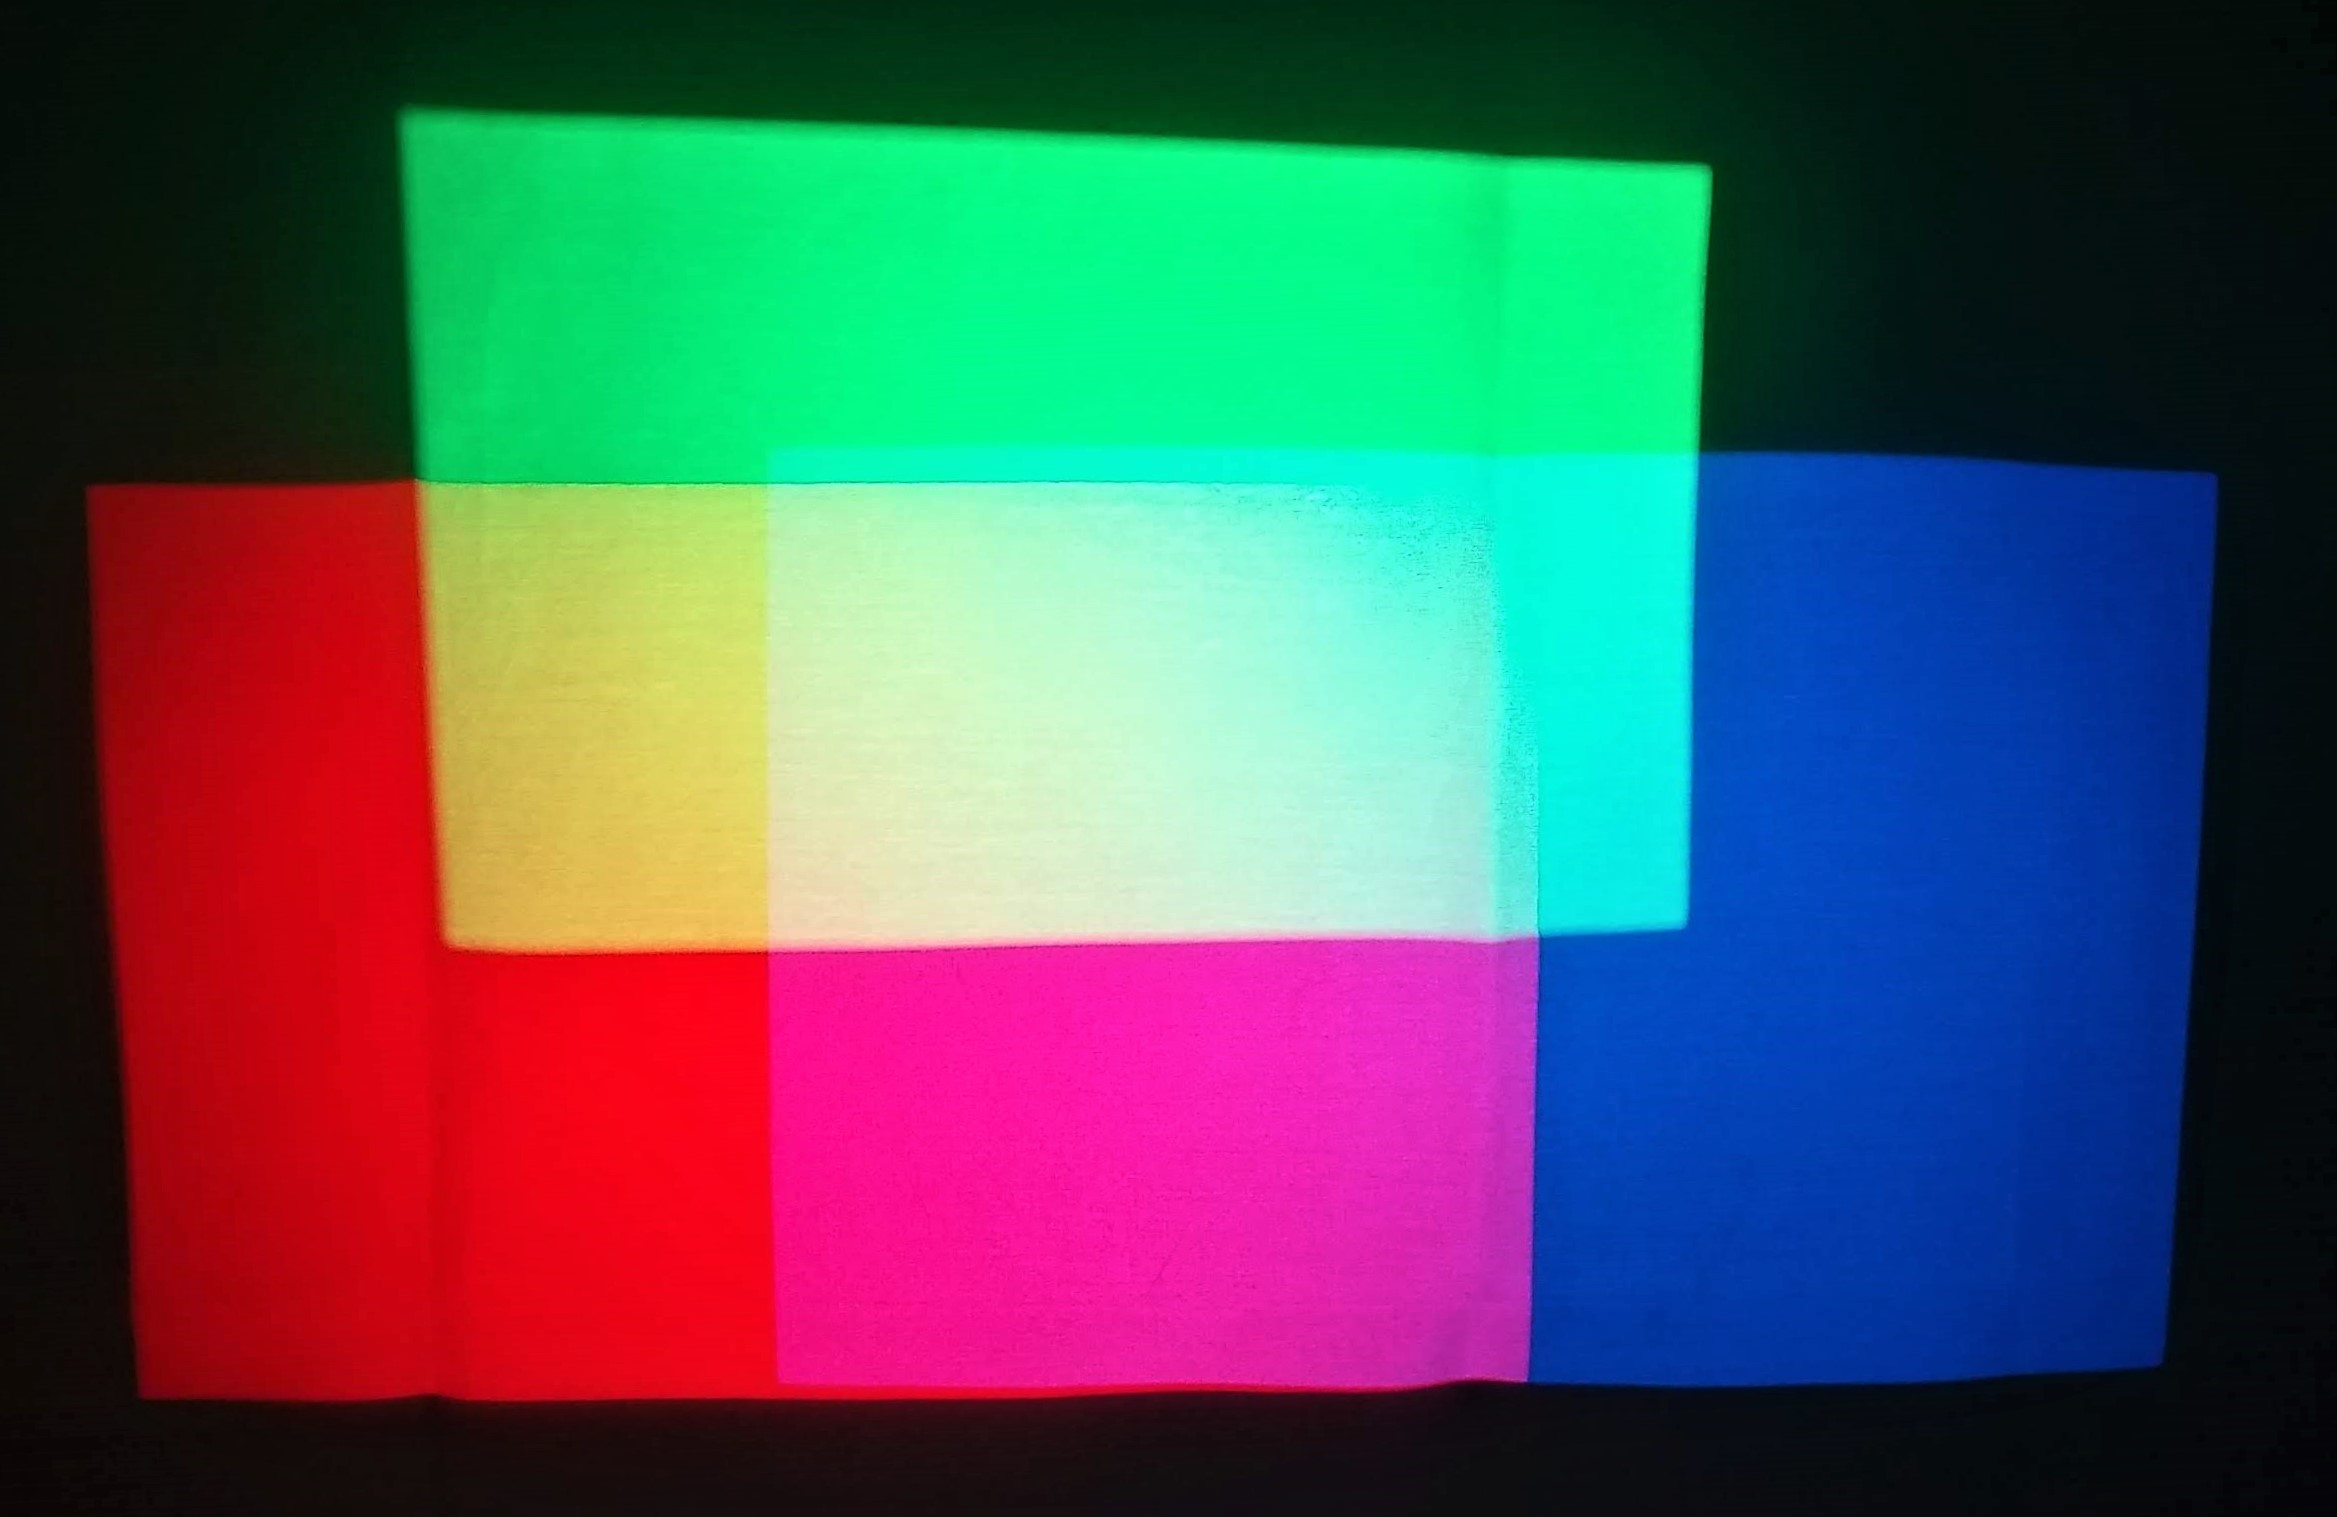 Projection of RGB light